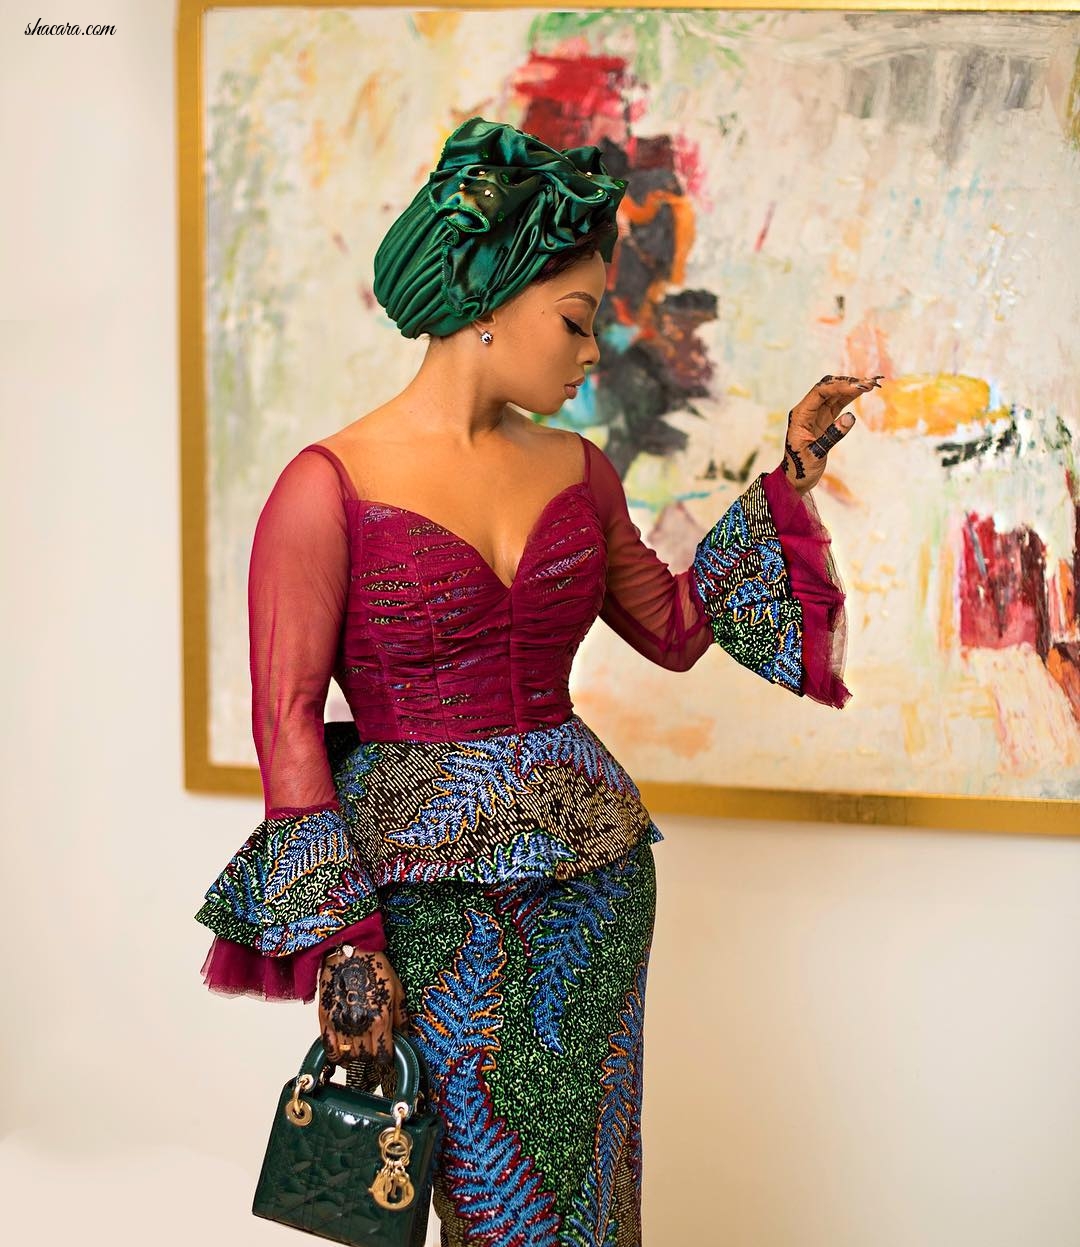 Only Toke Makinwa Can Look This Perfect In This Zhena Woman’s Printastic Ensemble